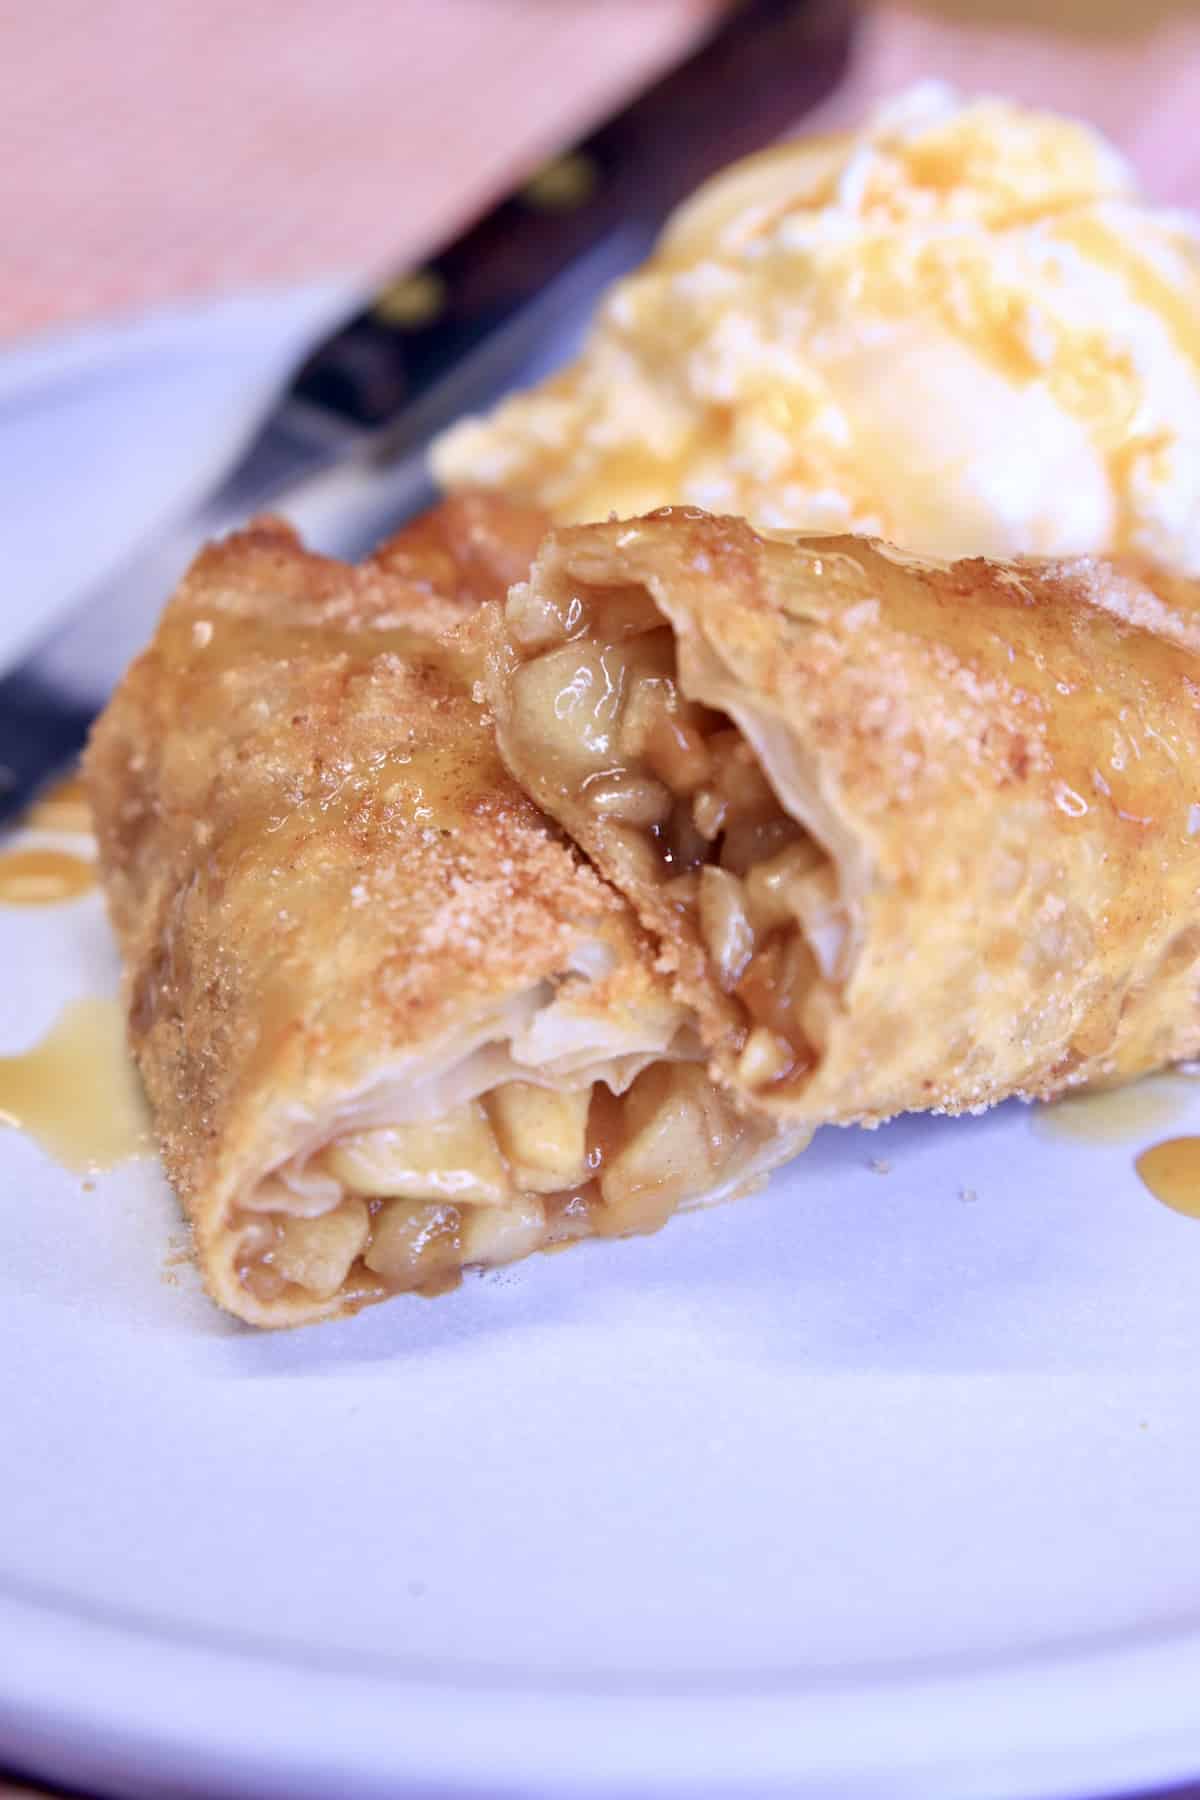 Apple Pie Egg Roll sliced in a half on plate with ice cream and caramel sauce.